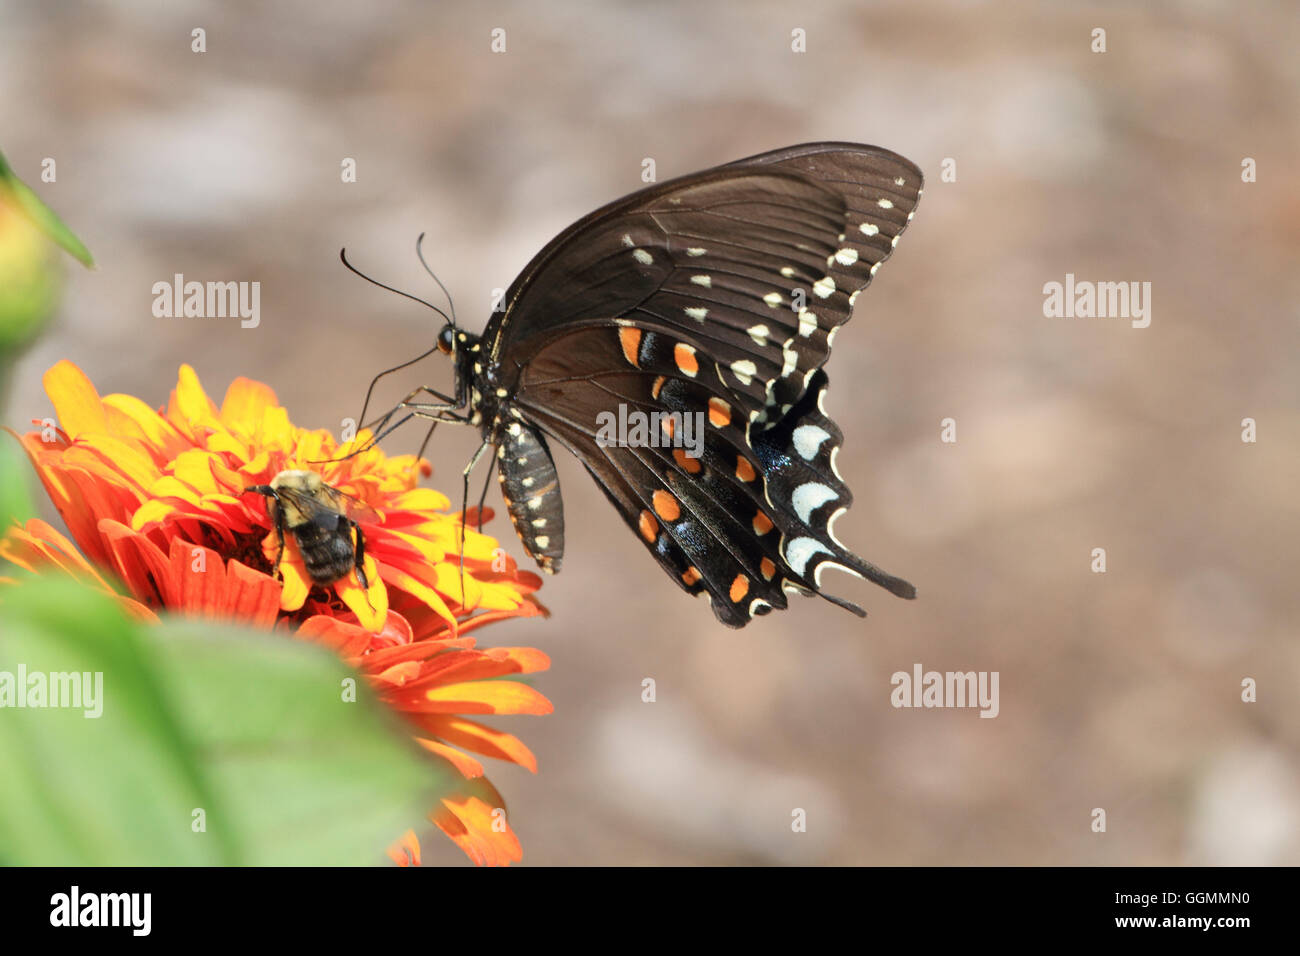 An Eastern Black Swallowtail butterfly, Papilio polyxenes, feeding on a flower at a park in Verona, NJ, USA Stock Photo